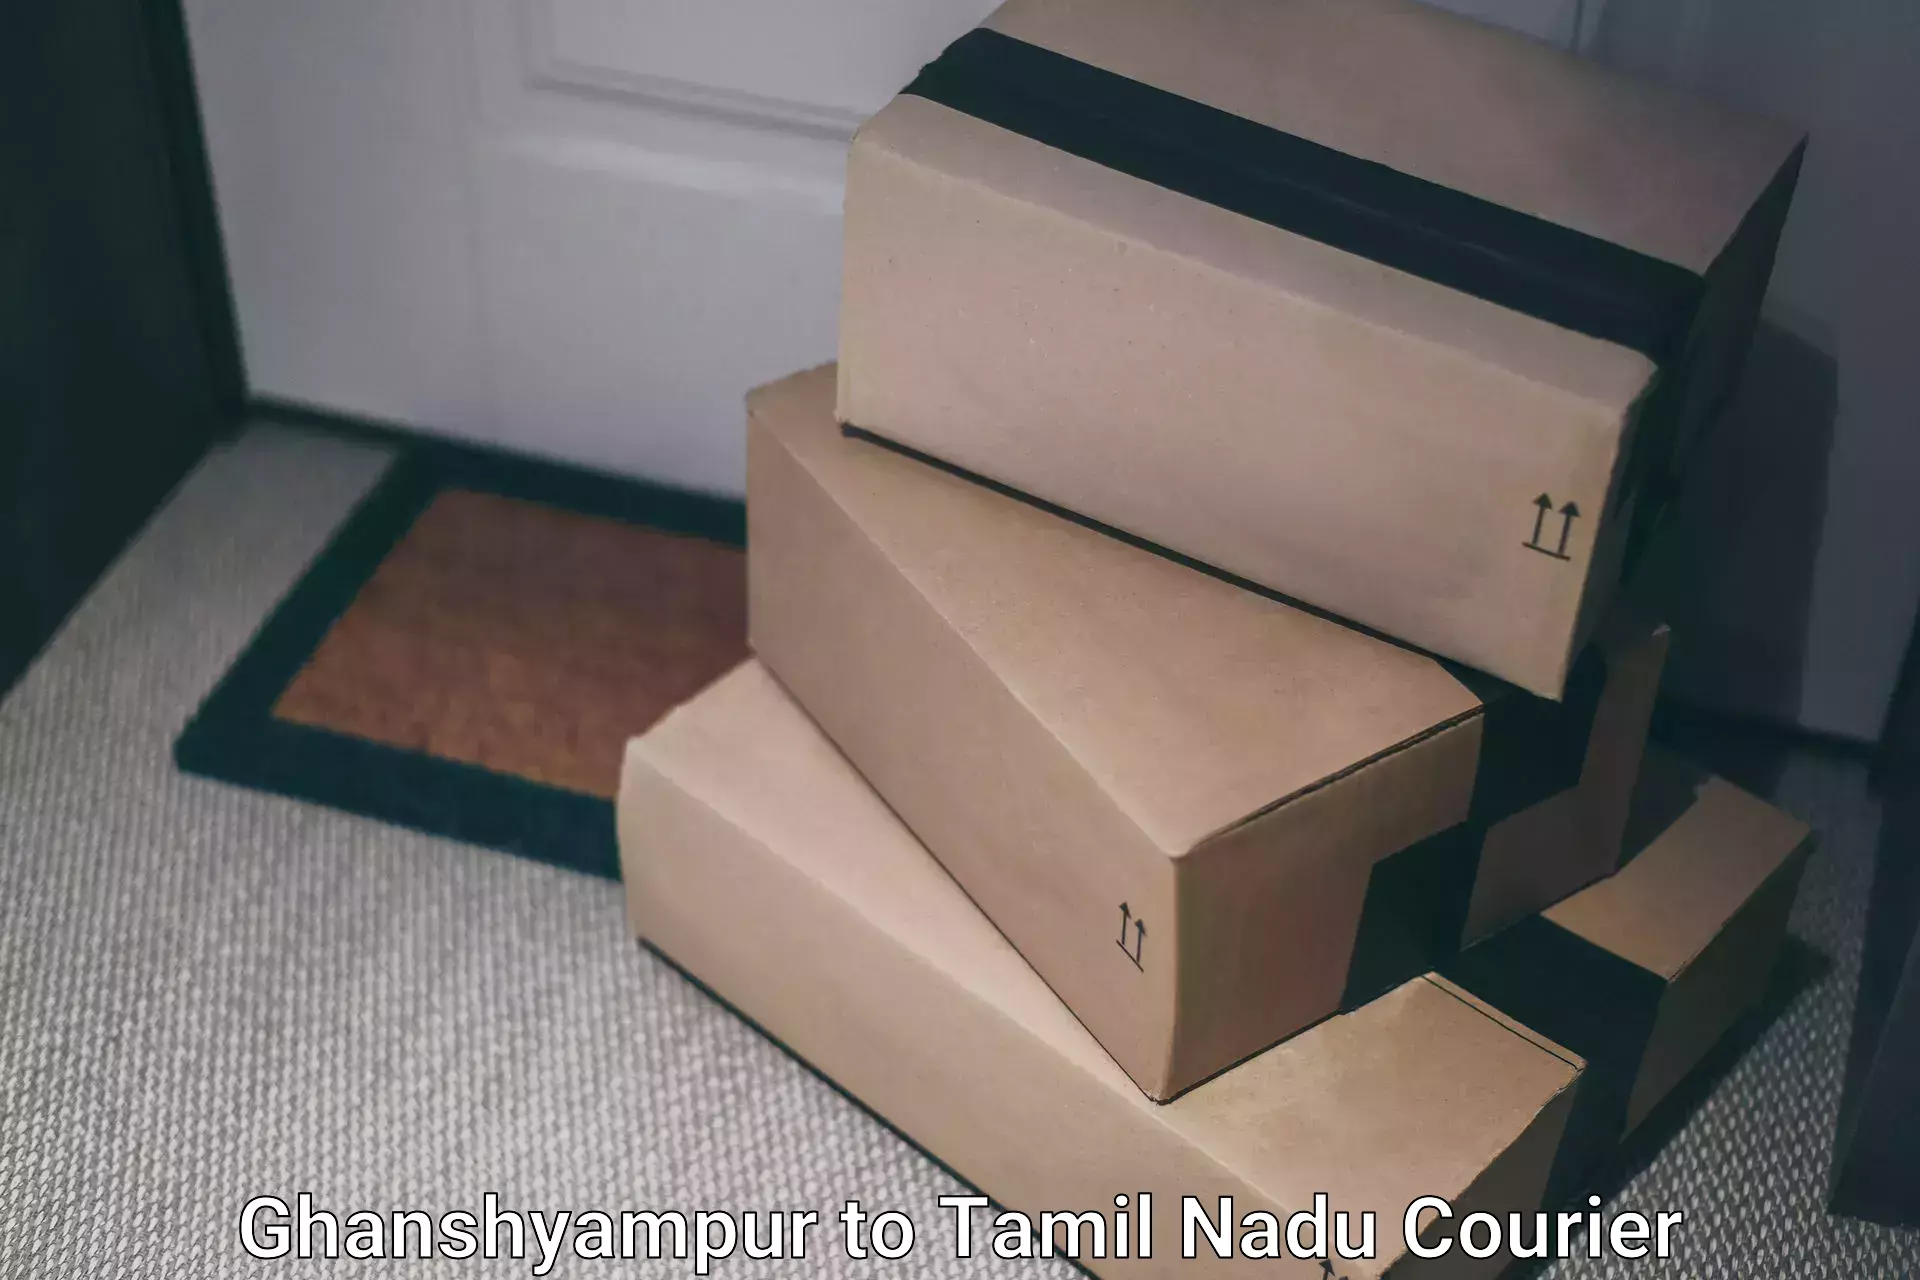 Large-scale shipping solutions Ghanshyampur to Tamil Nadu